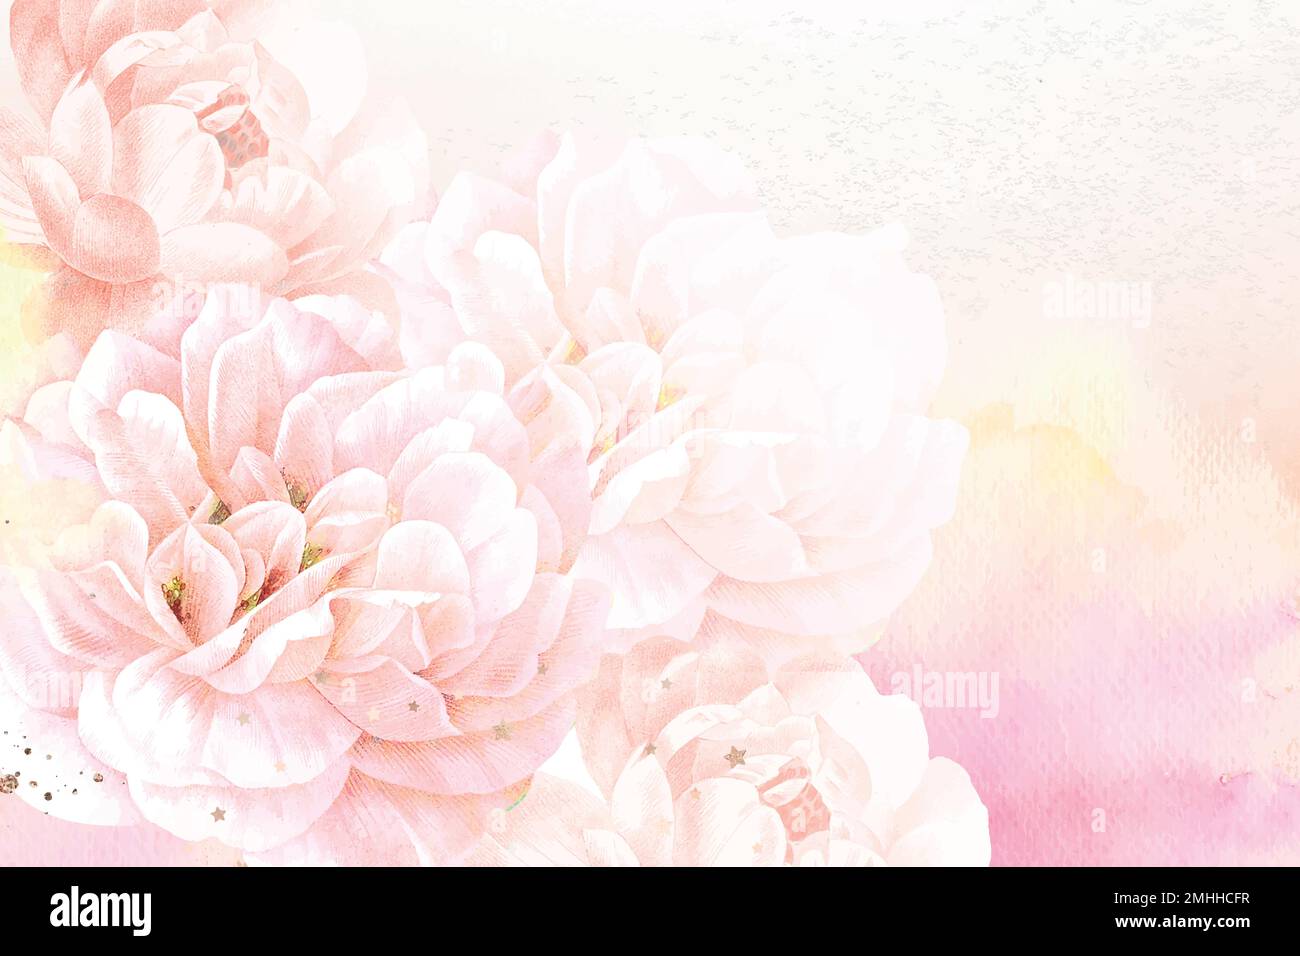 Pink flower aesthetic background Stock Vector Images - Alamy